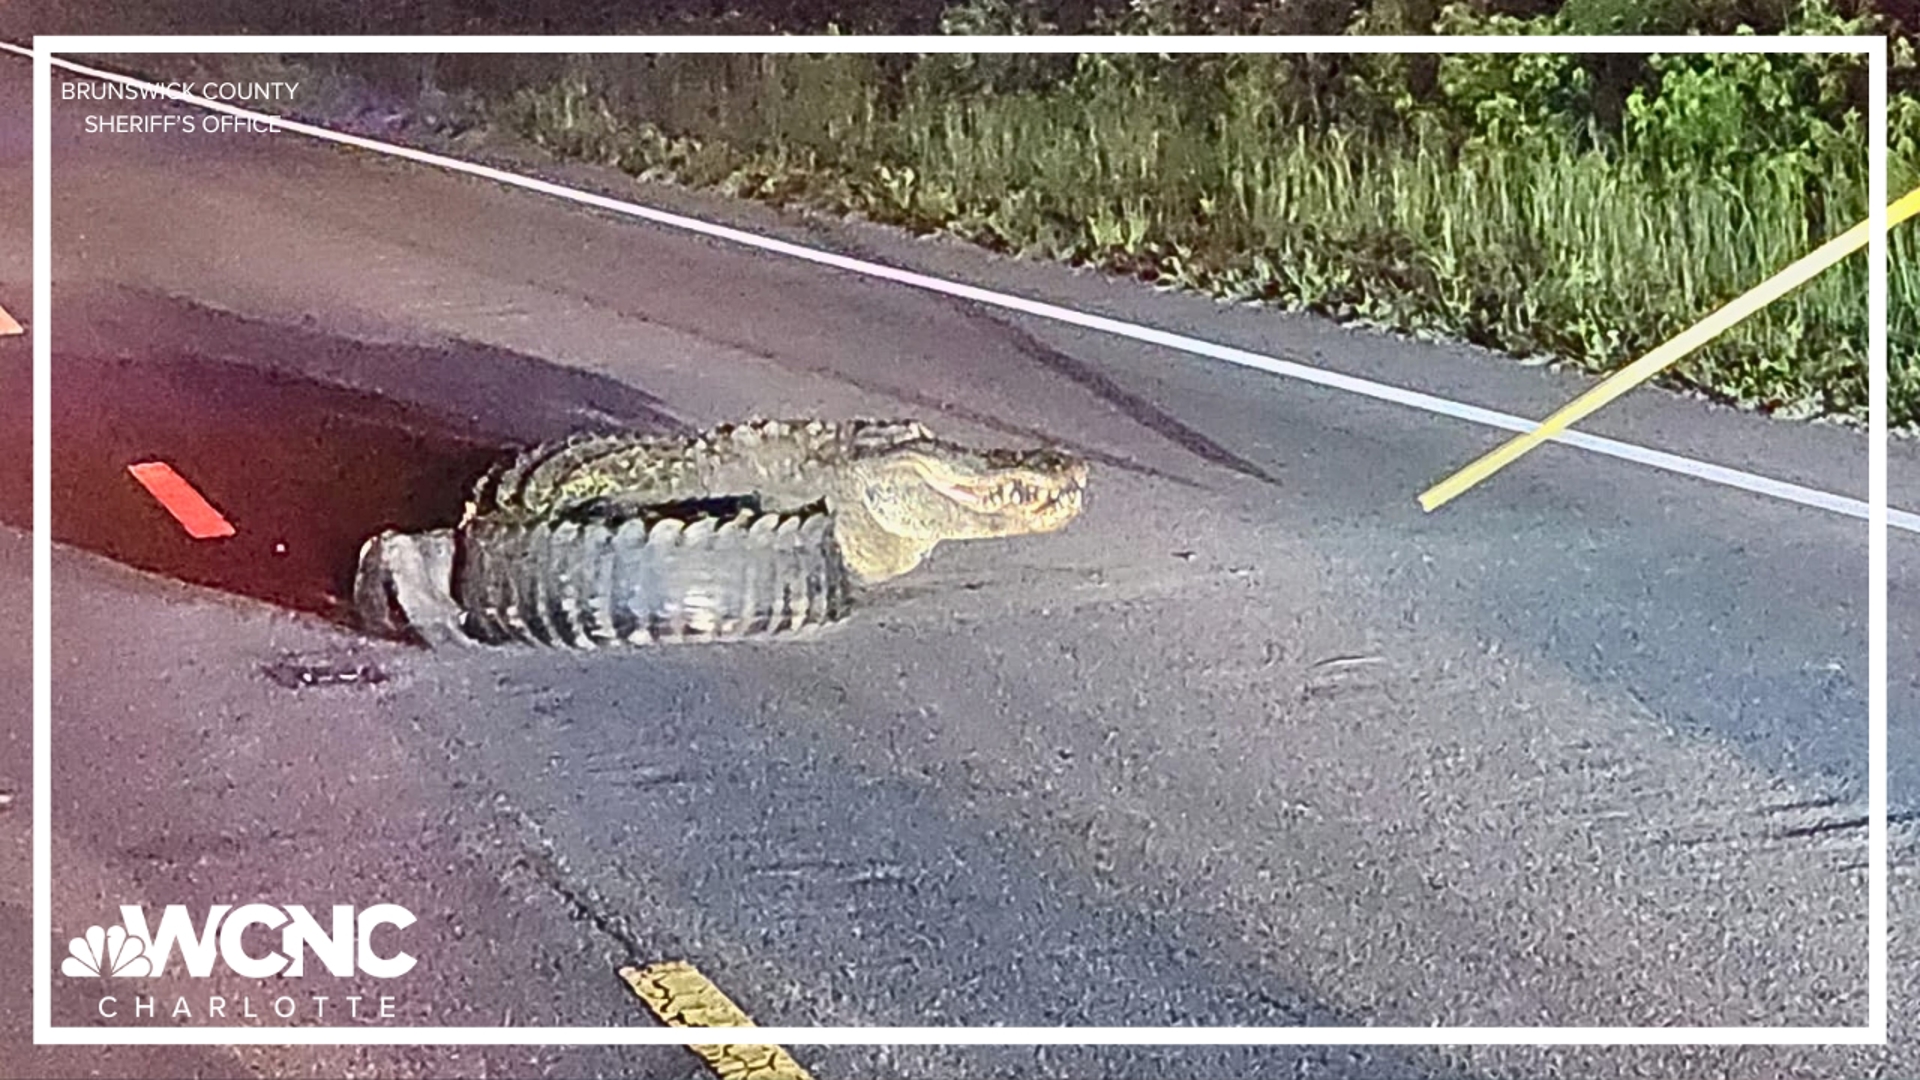 Deputies in eastern Noth Carolina had their hands full overnight when they received reports of an alligator lunging at drivers.